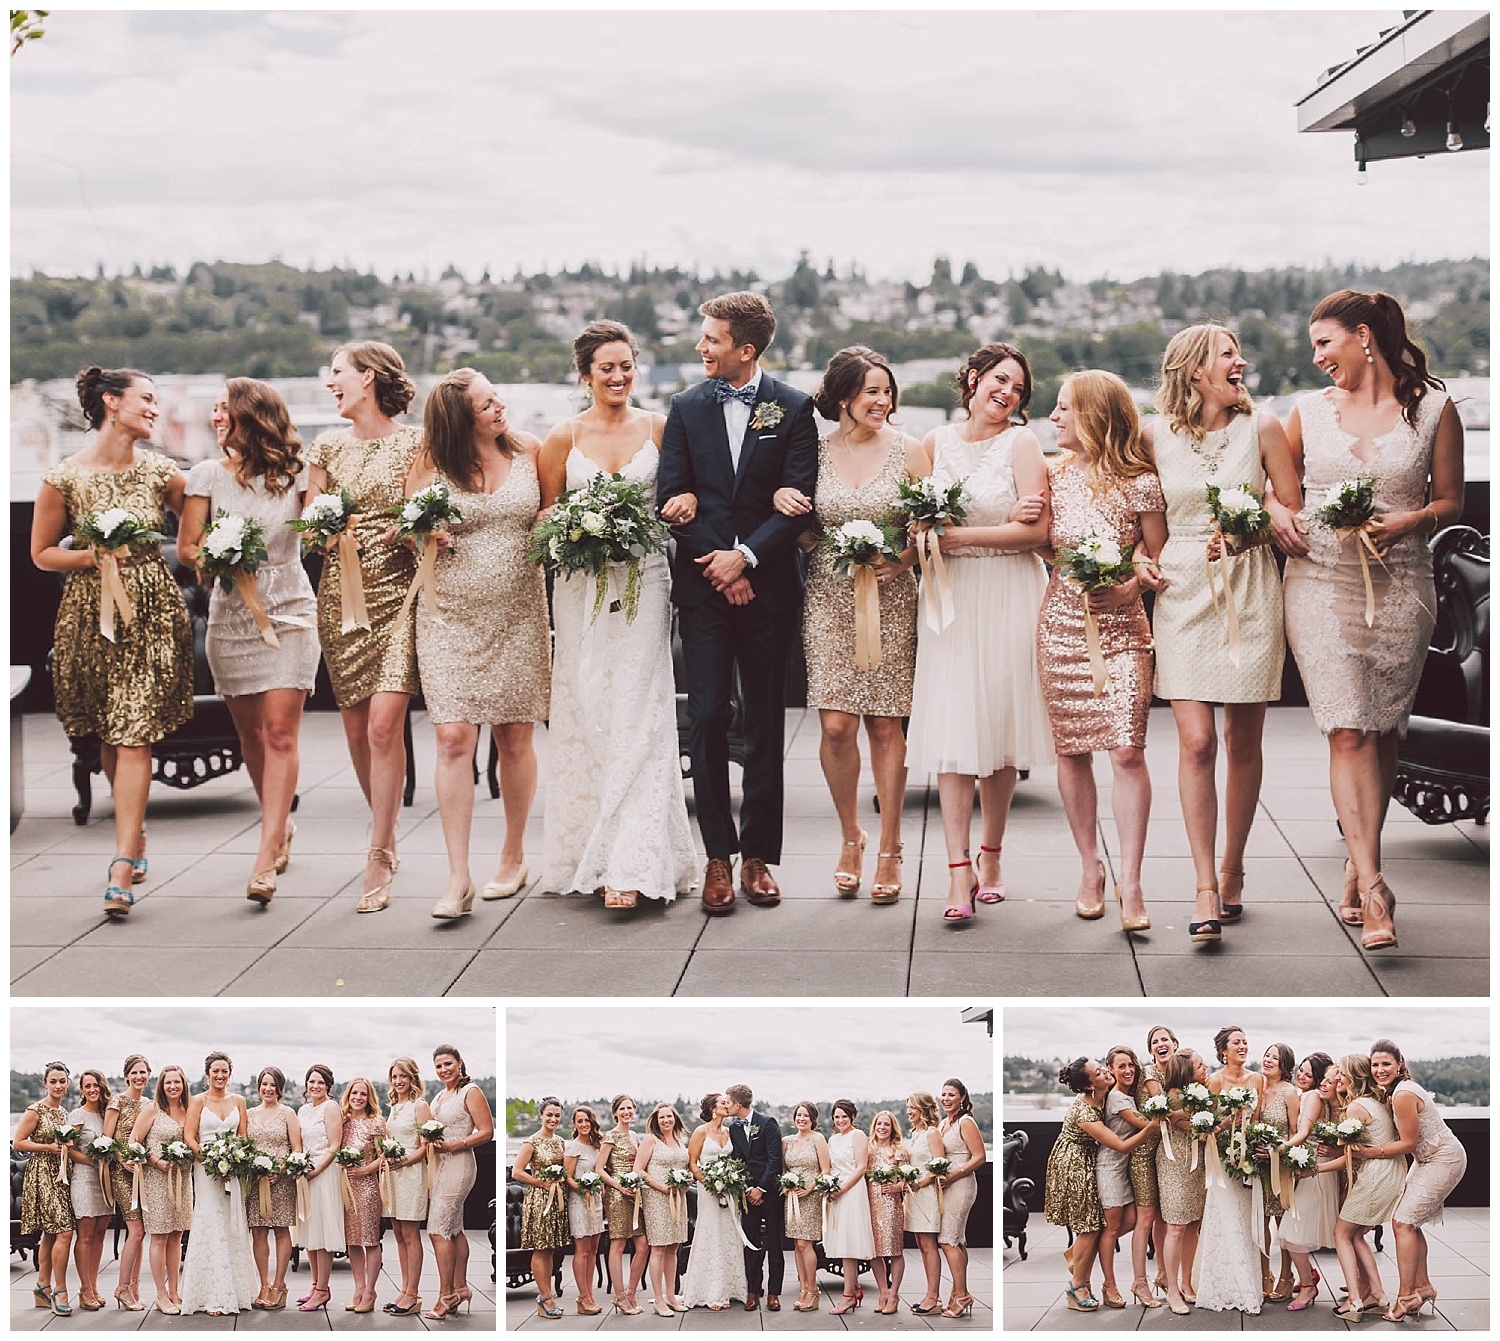 Gold bridesmaids dresses in Seattle